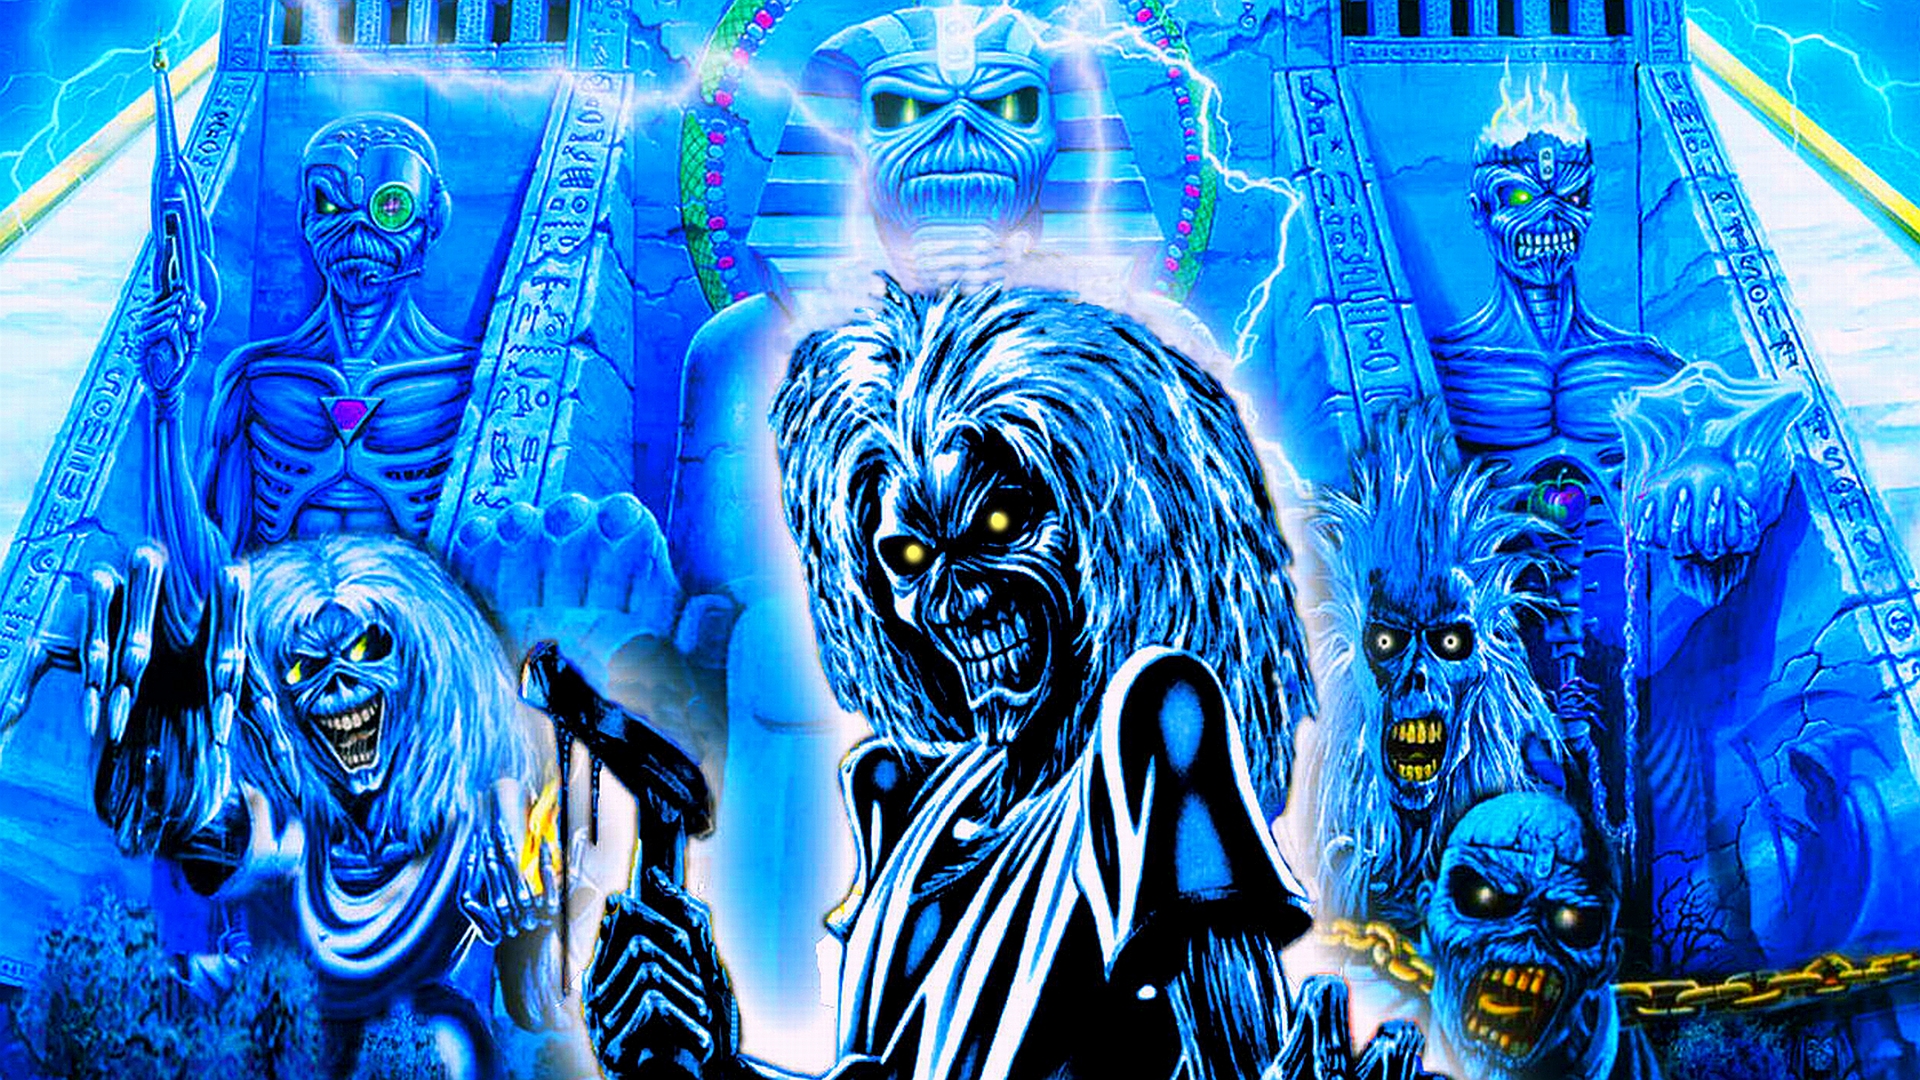 Amazing Iron Maiden Pictures & Backgrounds